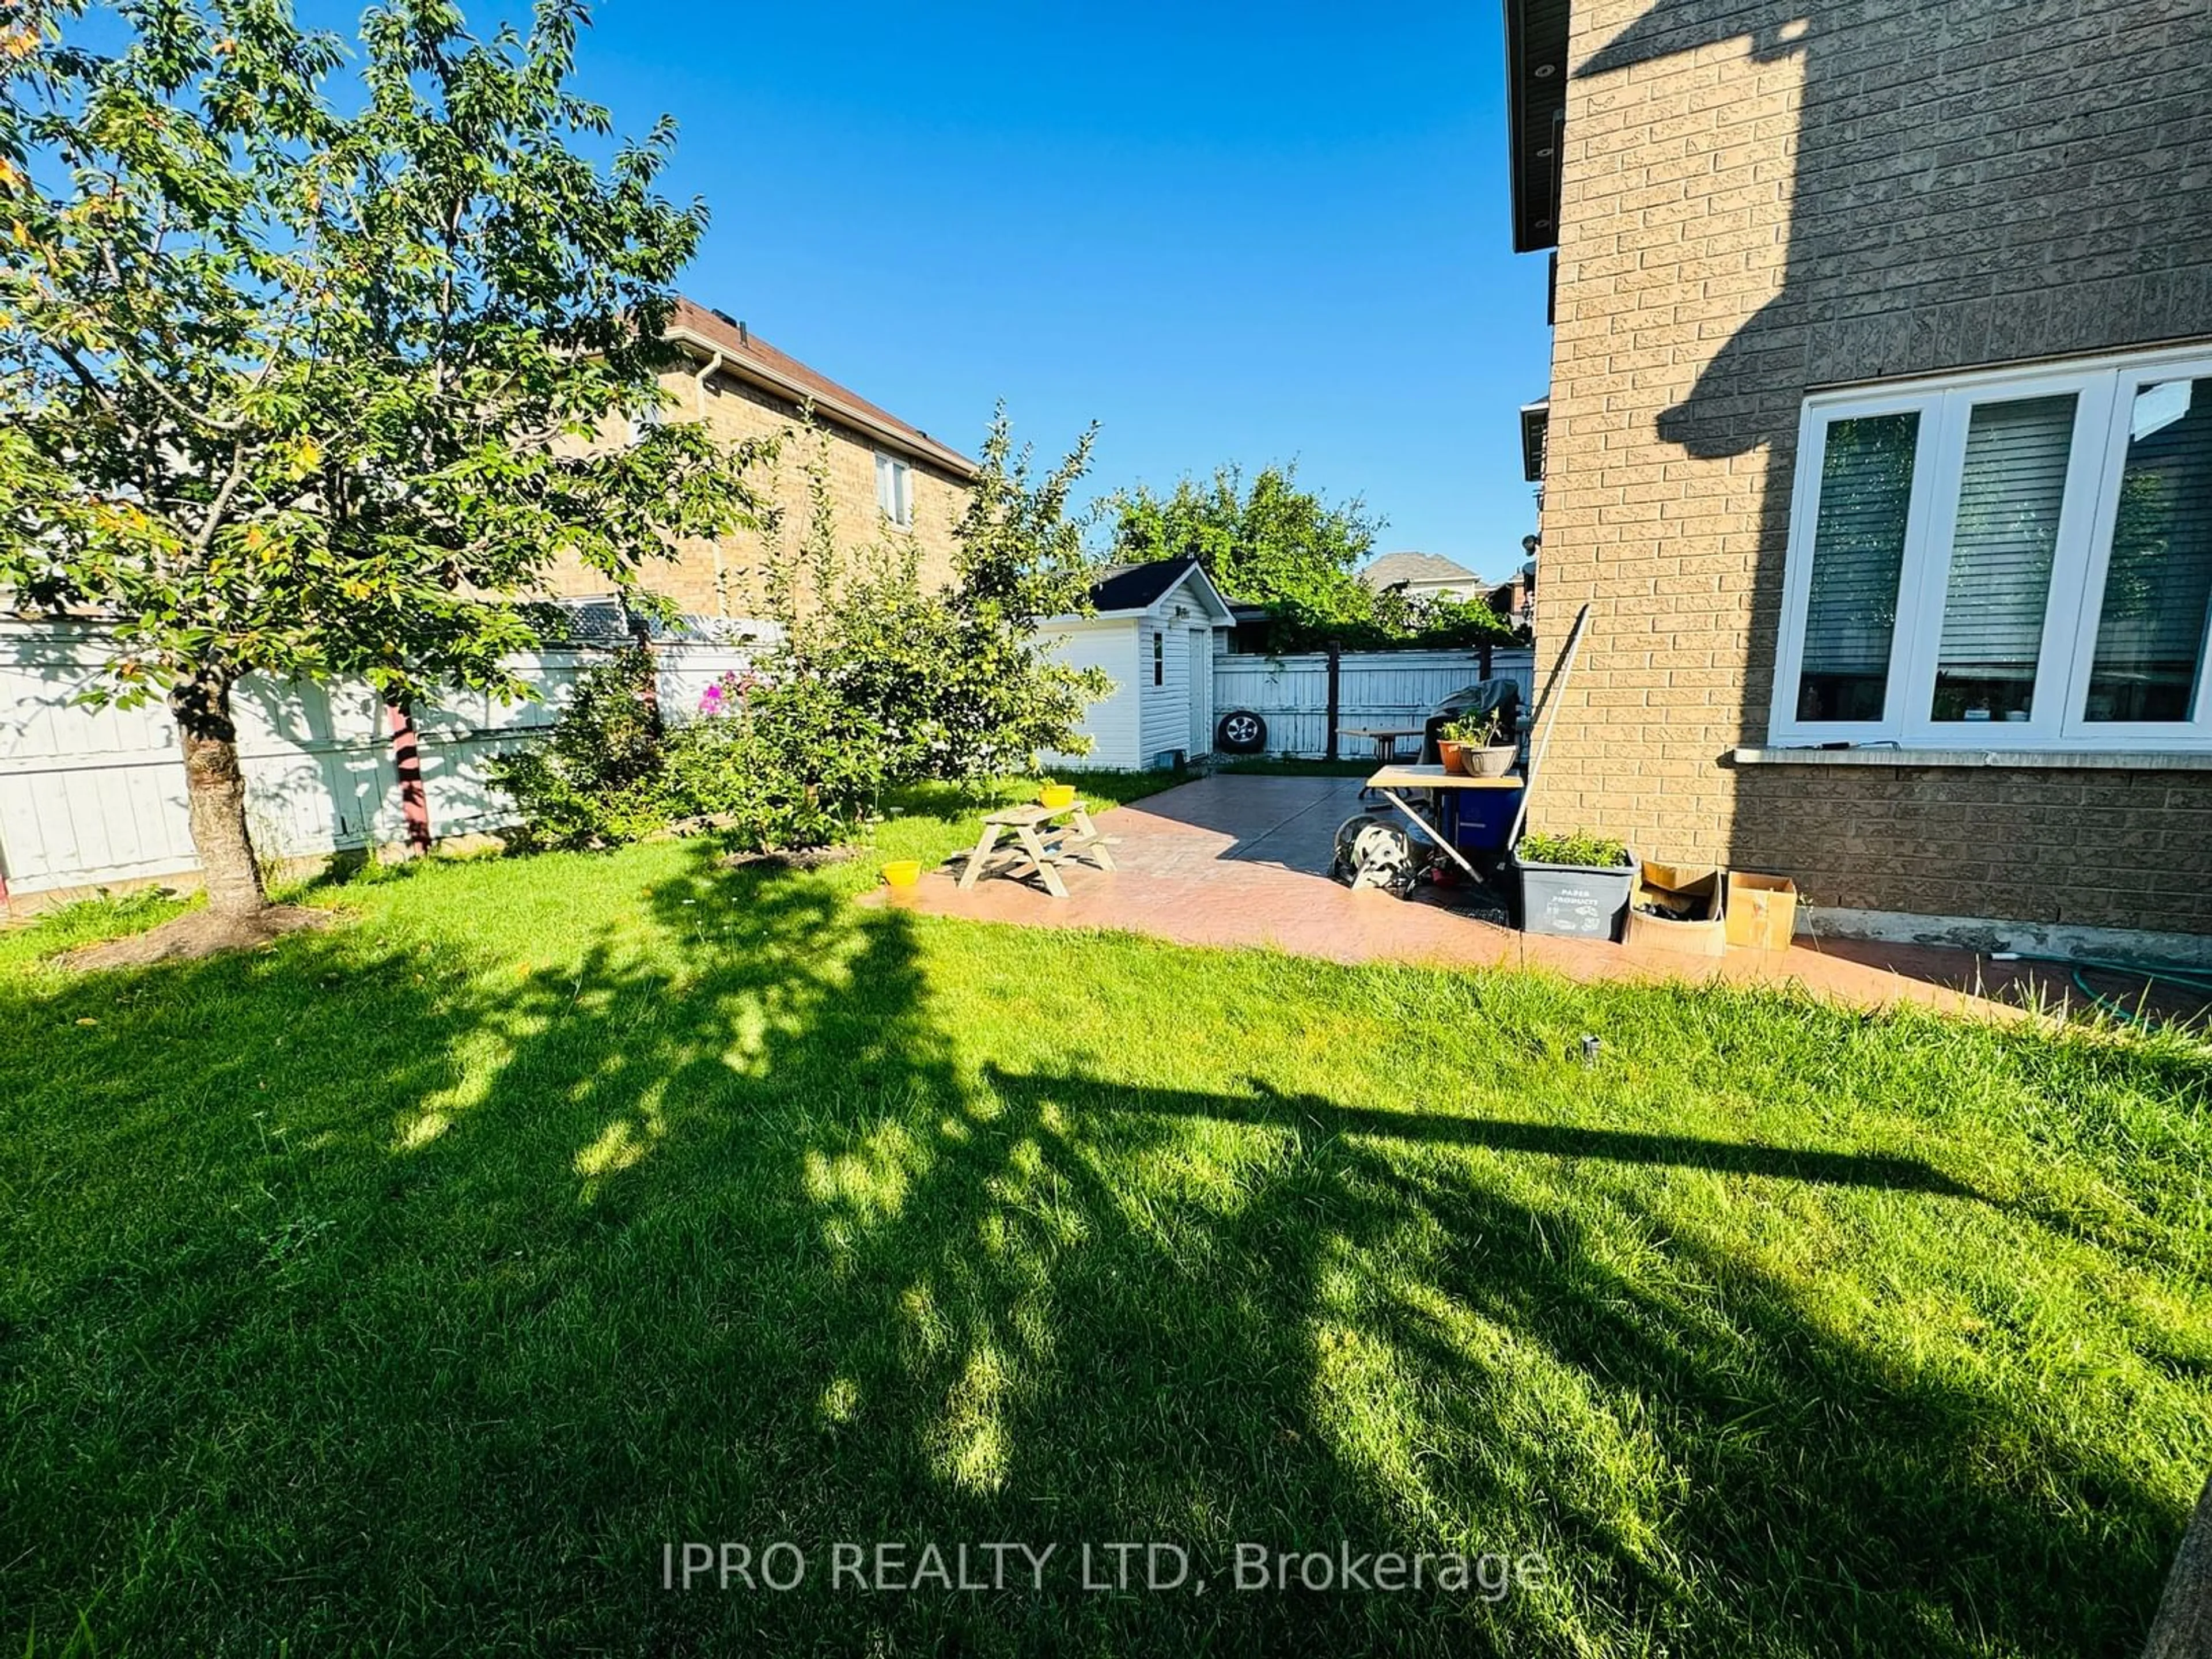 Frontside or backside of a home for 220 Drinkwater Rd, Brampton Ontario L6Y 4Y8